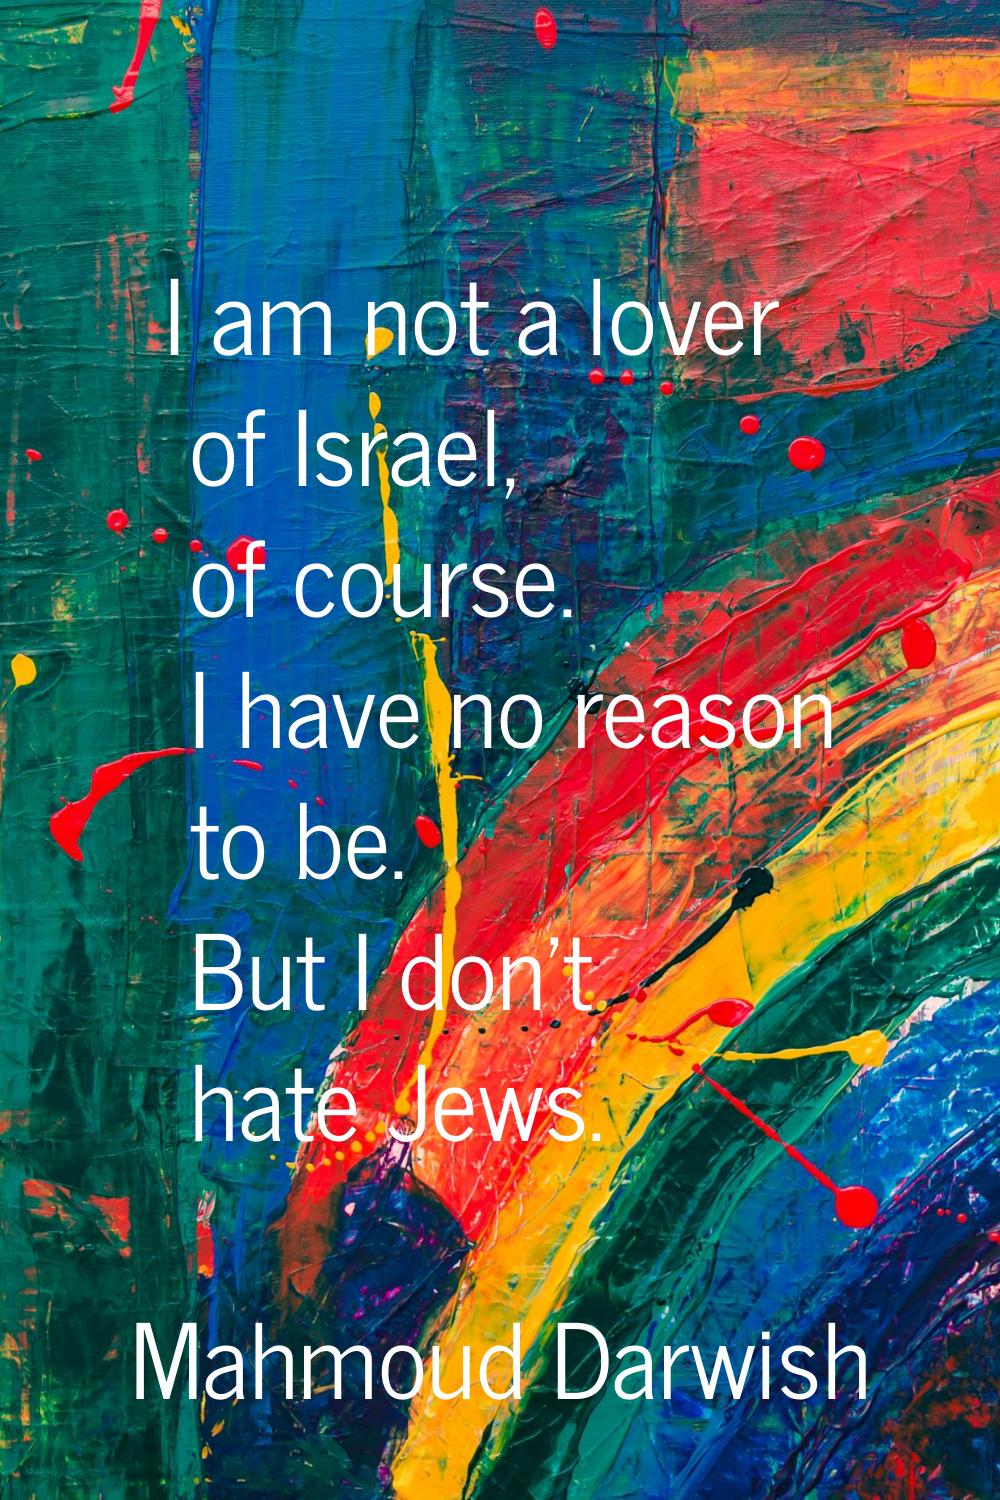 I am not a lover of Israel, of course. I have no reason to be. But I don't hate Jews.